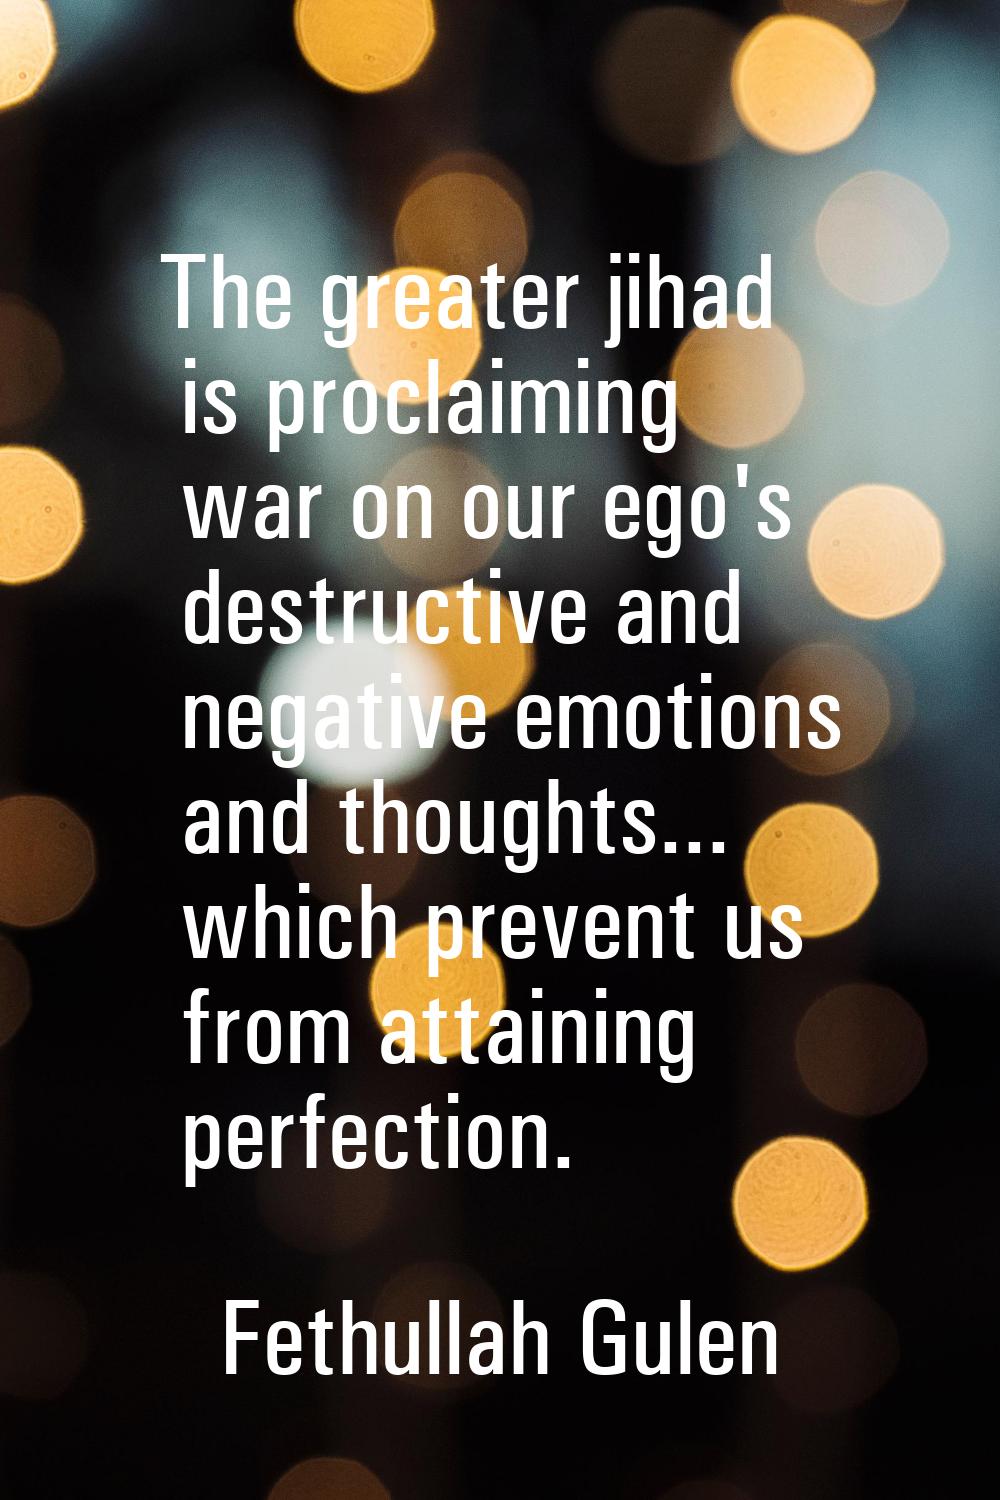 The greater jihad is proclaiming war on our ego's destructive and negative emotions and thoughts...